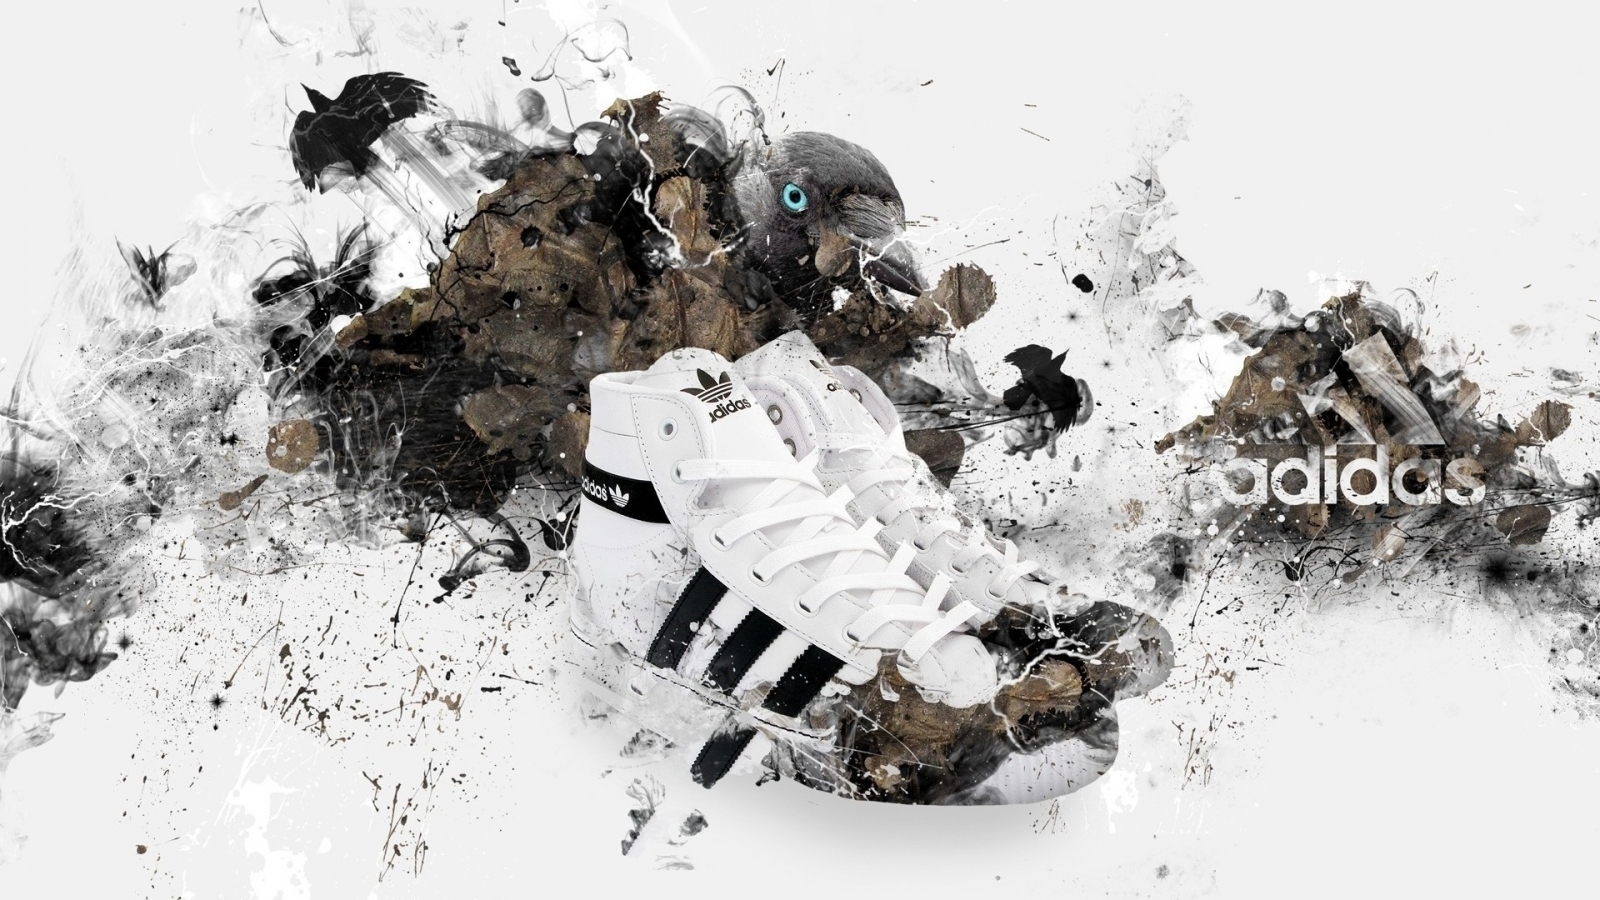 Adidas Shoes for 1600 x 900 HDTV resolution